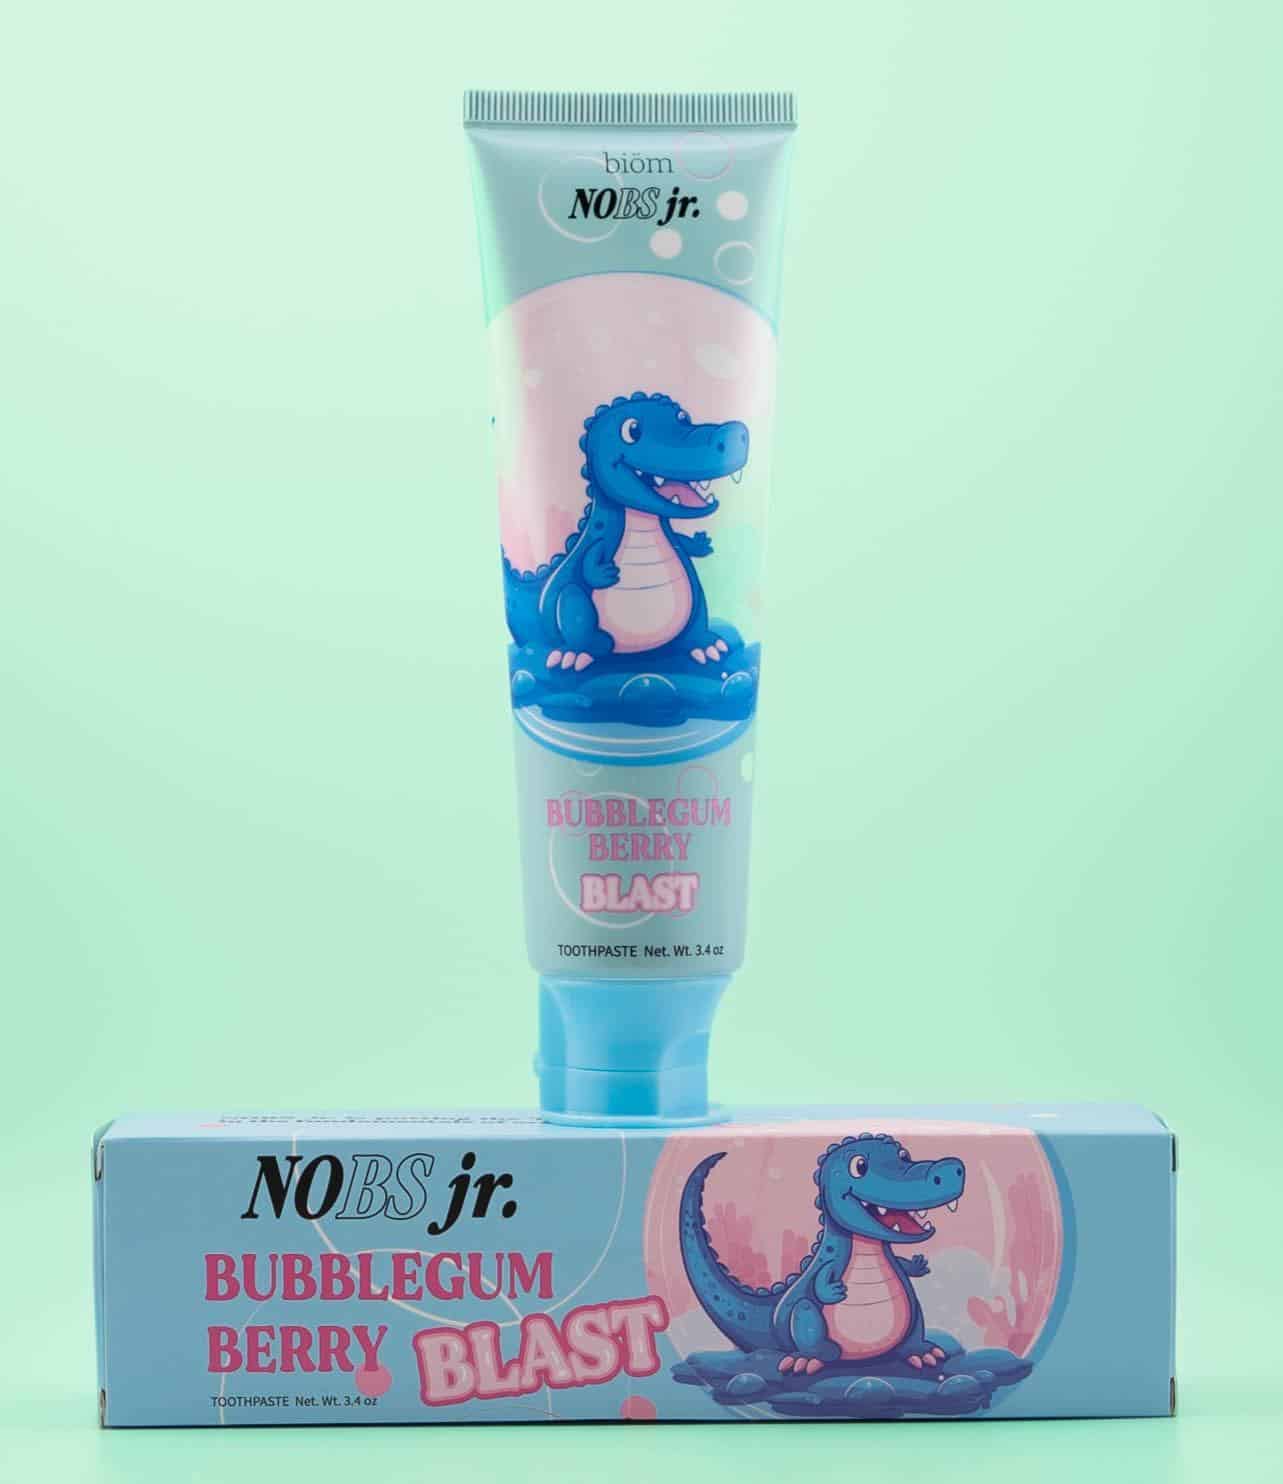 NOBS Jr toothpaste from the natural personal care brand biöm